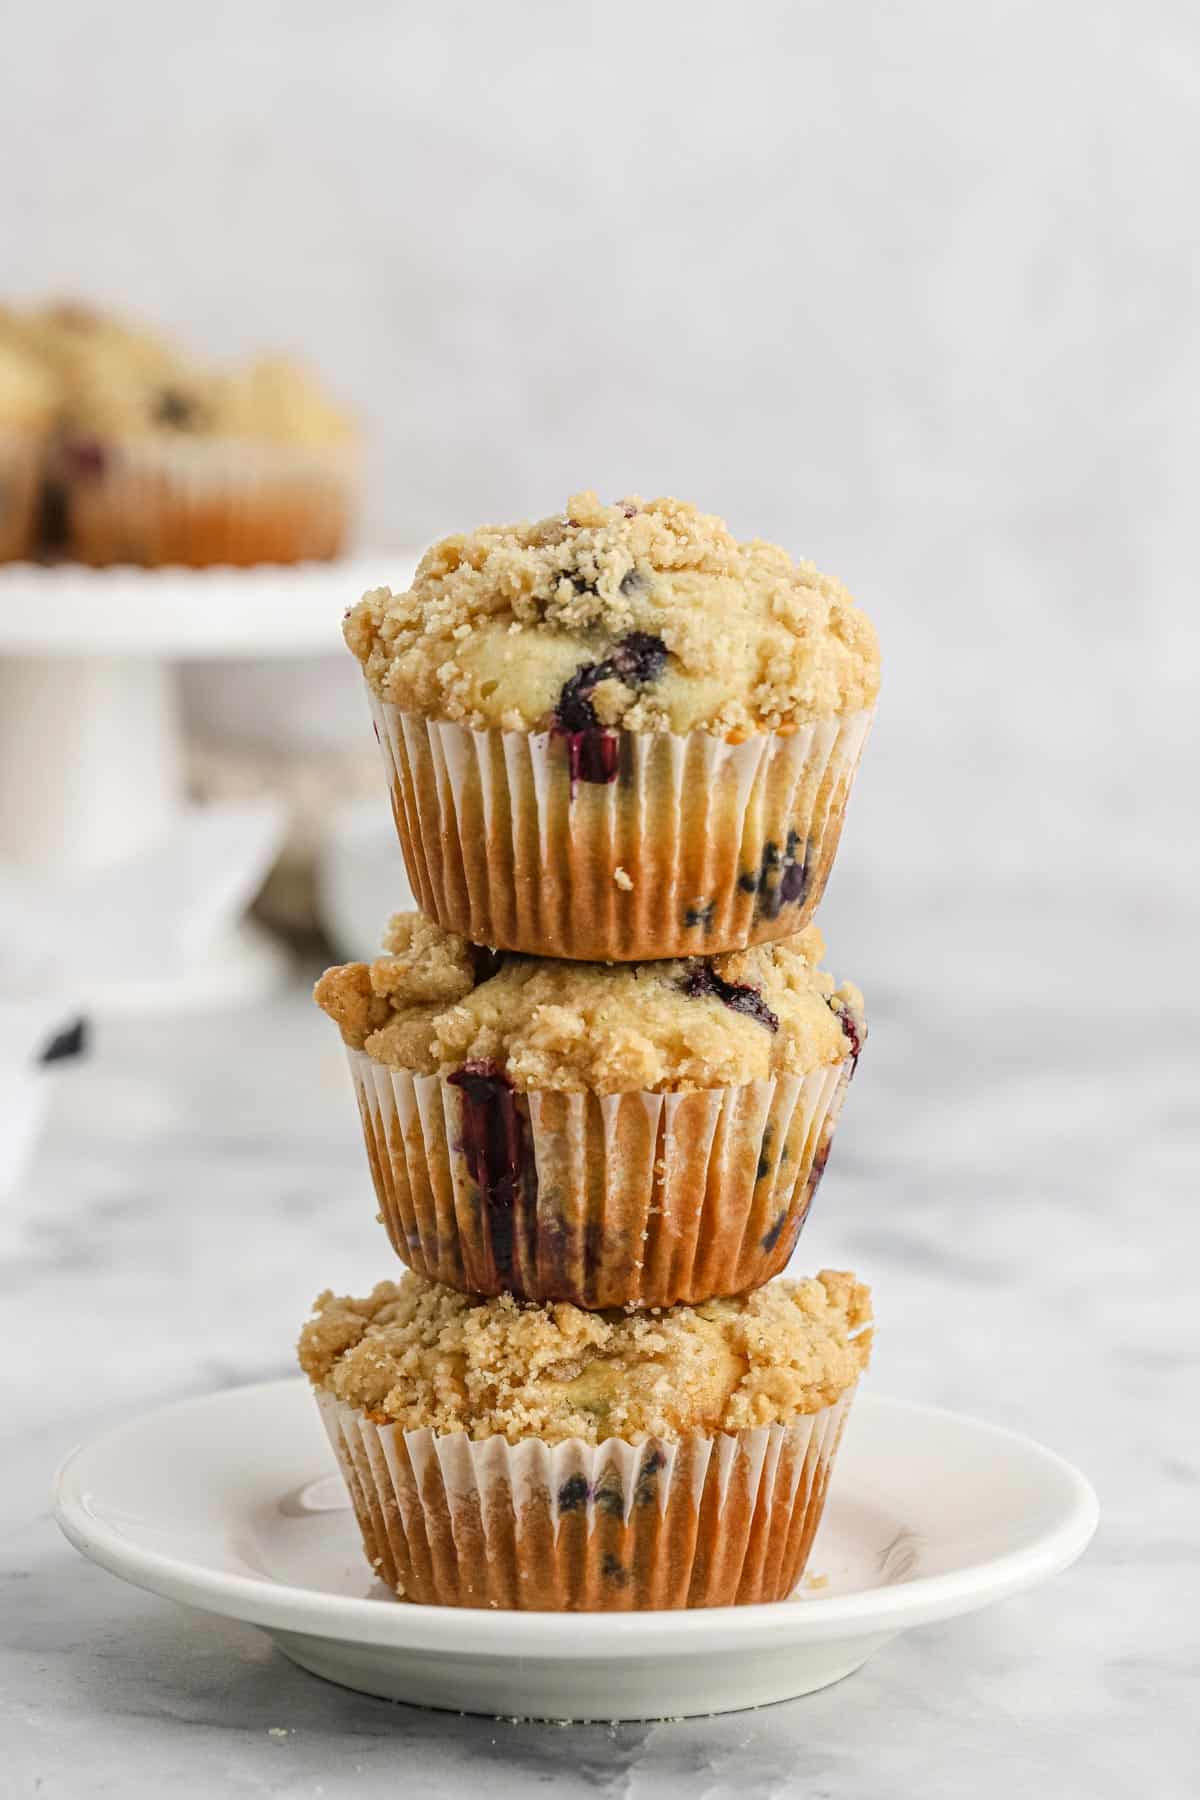 Three blueberry muffins with crumb topping stacked on top of each other.